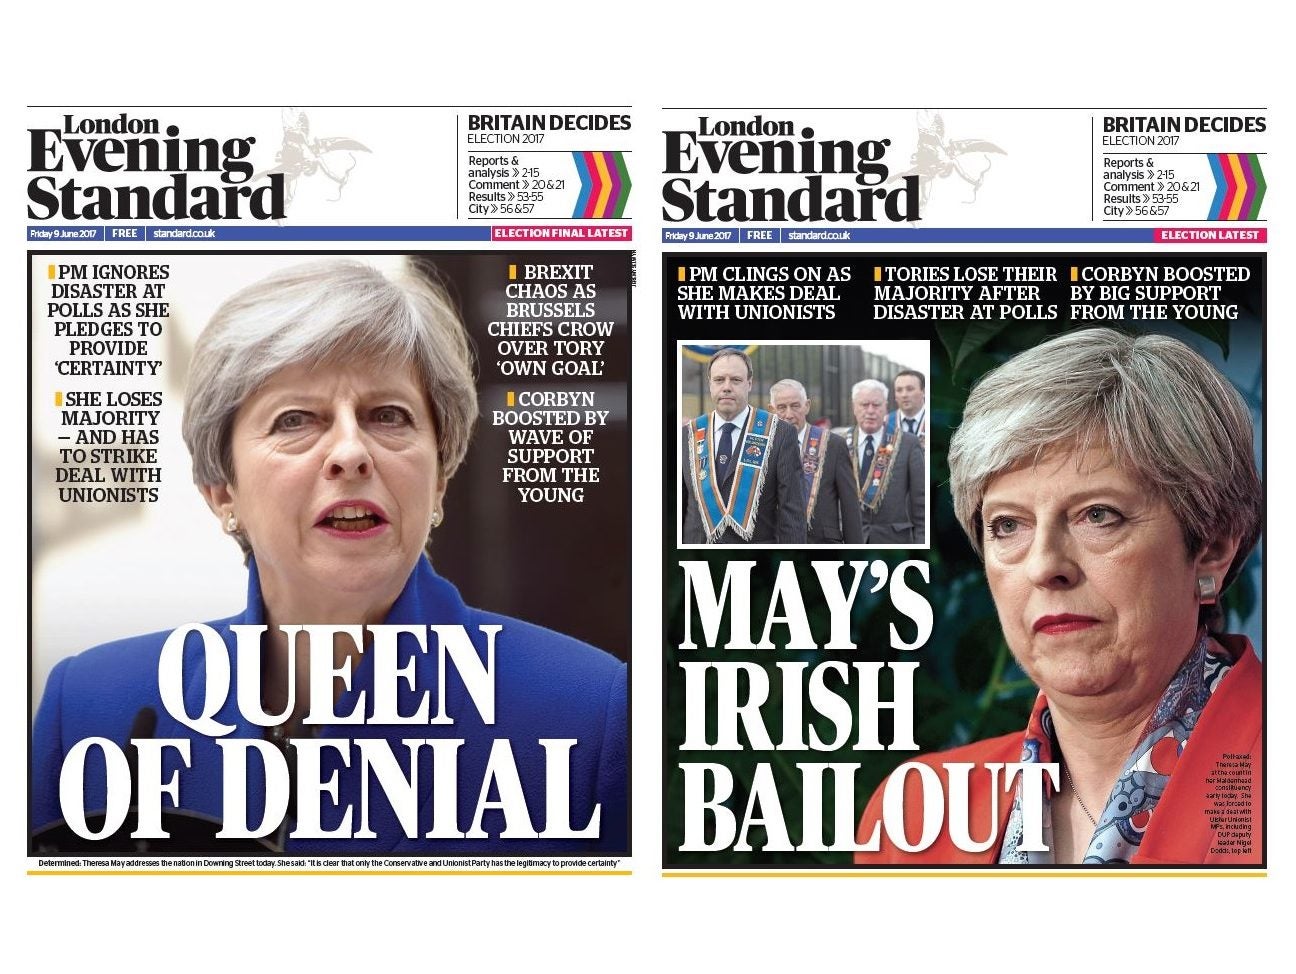 More than 1m copies of Evening Standard's election result editions picked up in record for daily paper